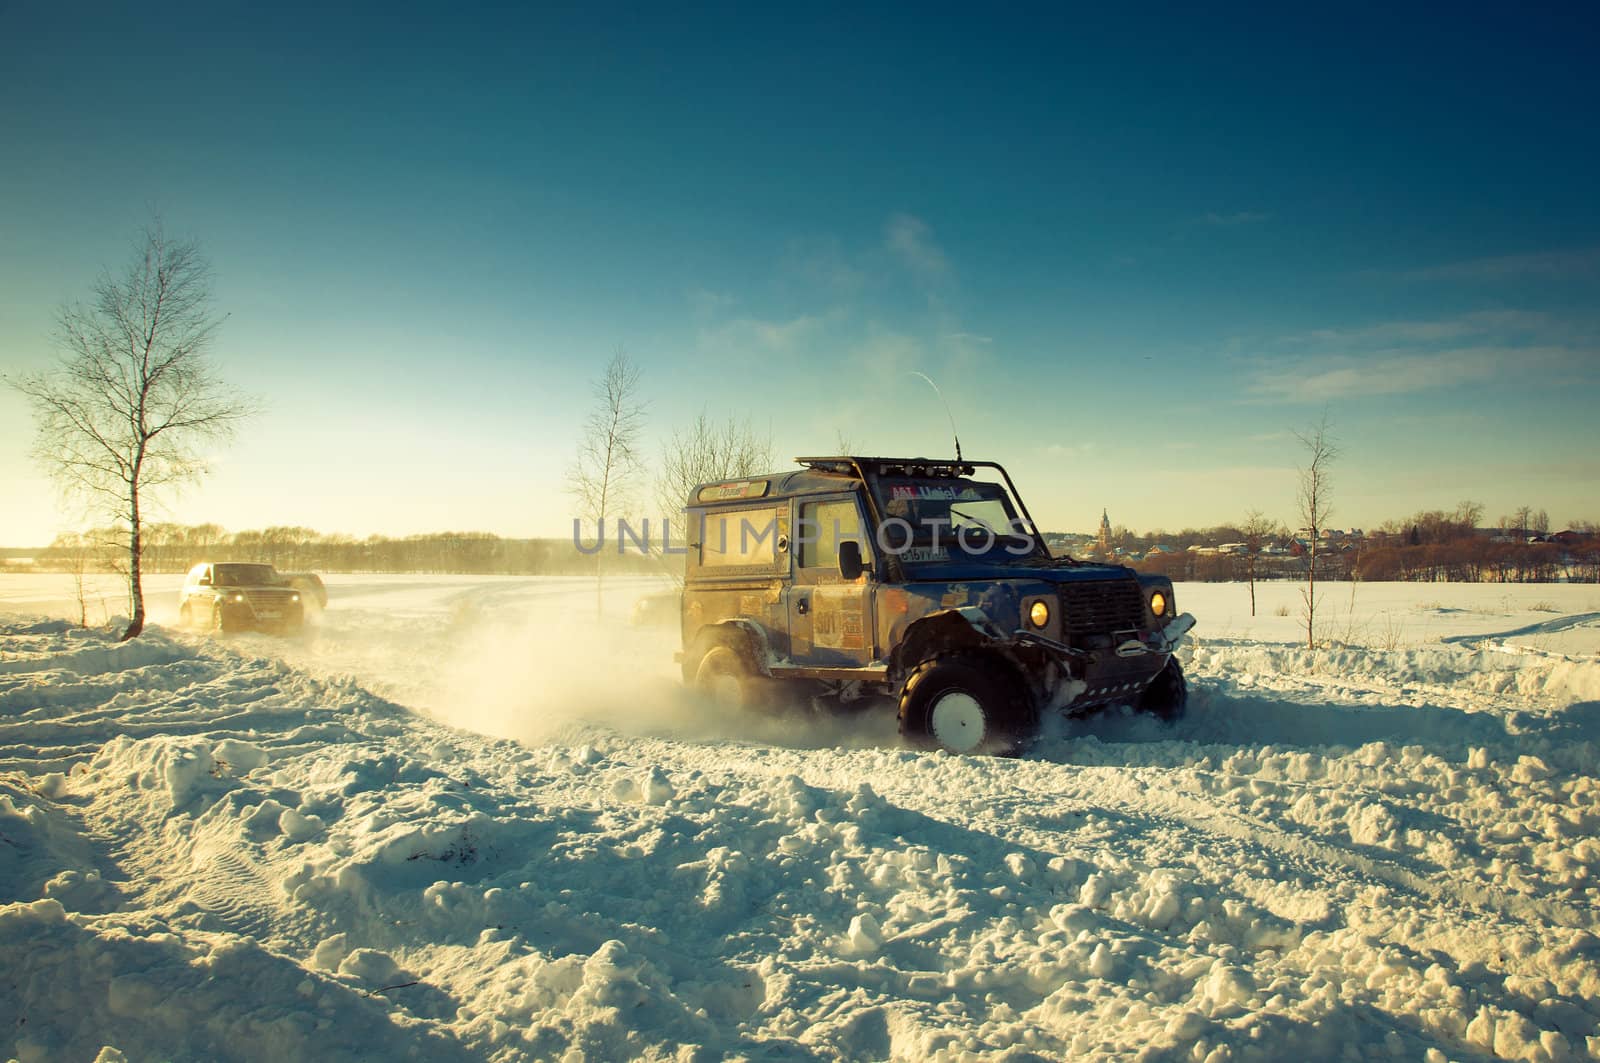 Land Rover Defender 90 suv
Car on background the Russian winter.
February 19, 2011. Mattrazz Trophy # 18